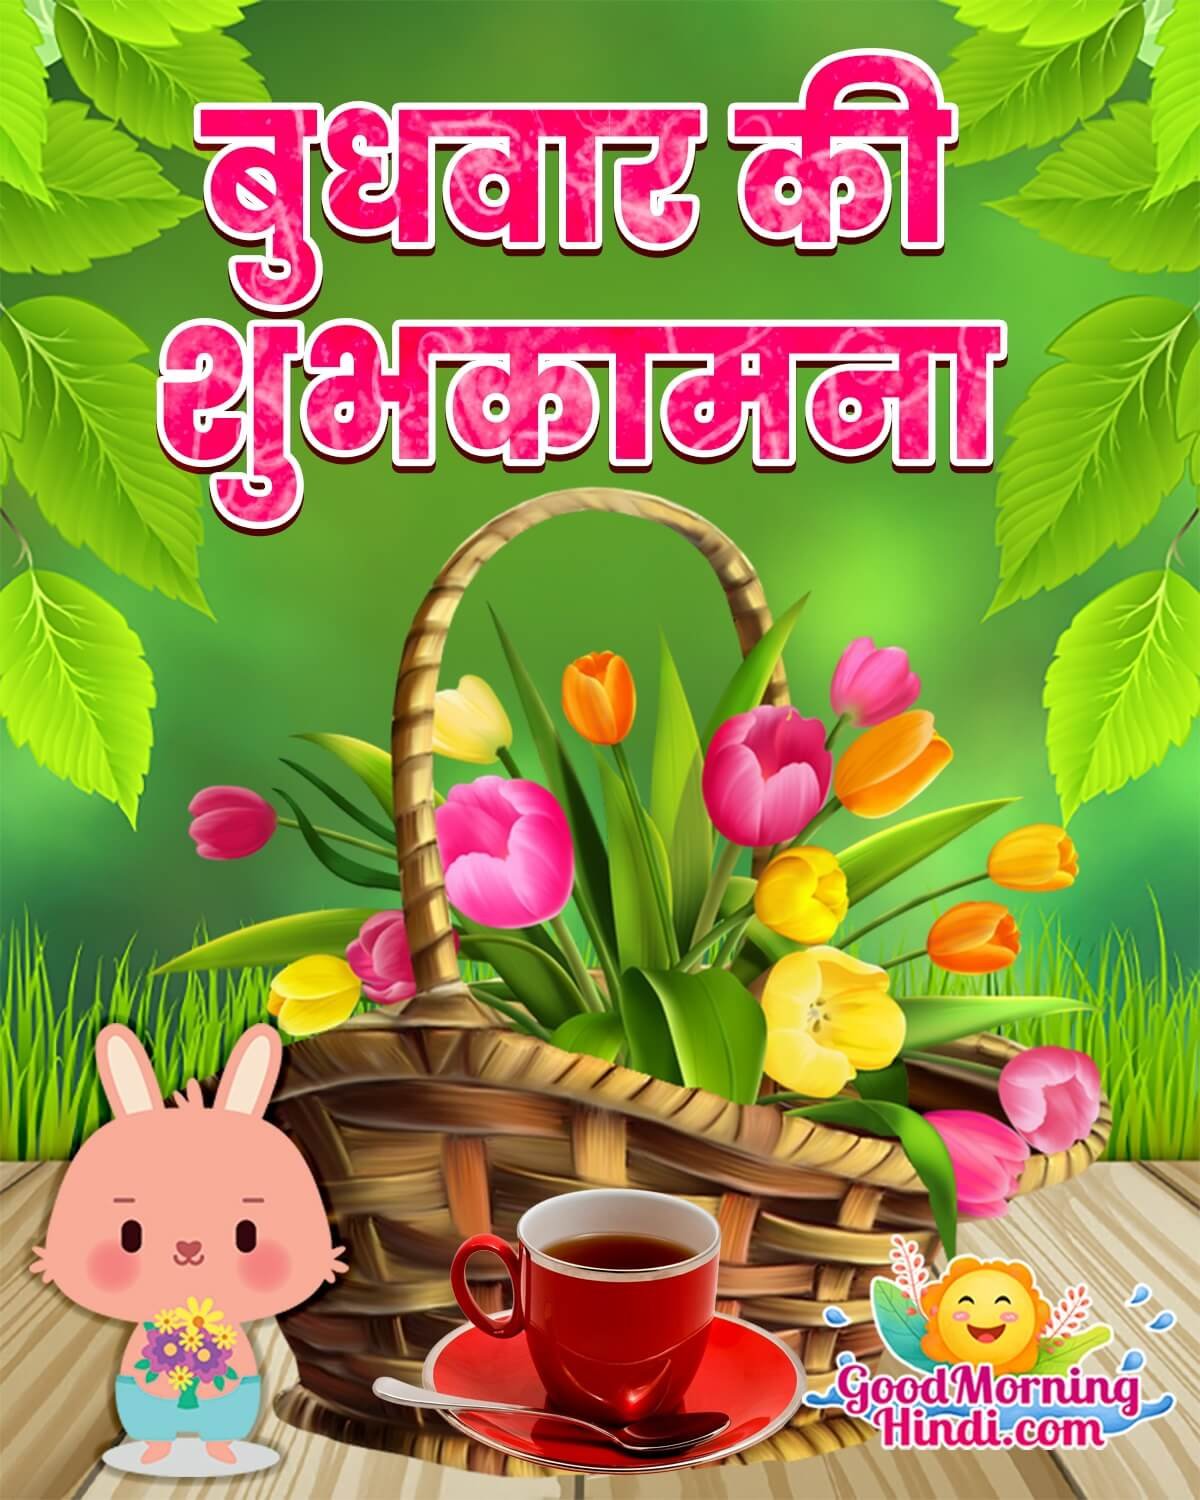 Good Morning Happy Wednesday Images In Hindi